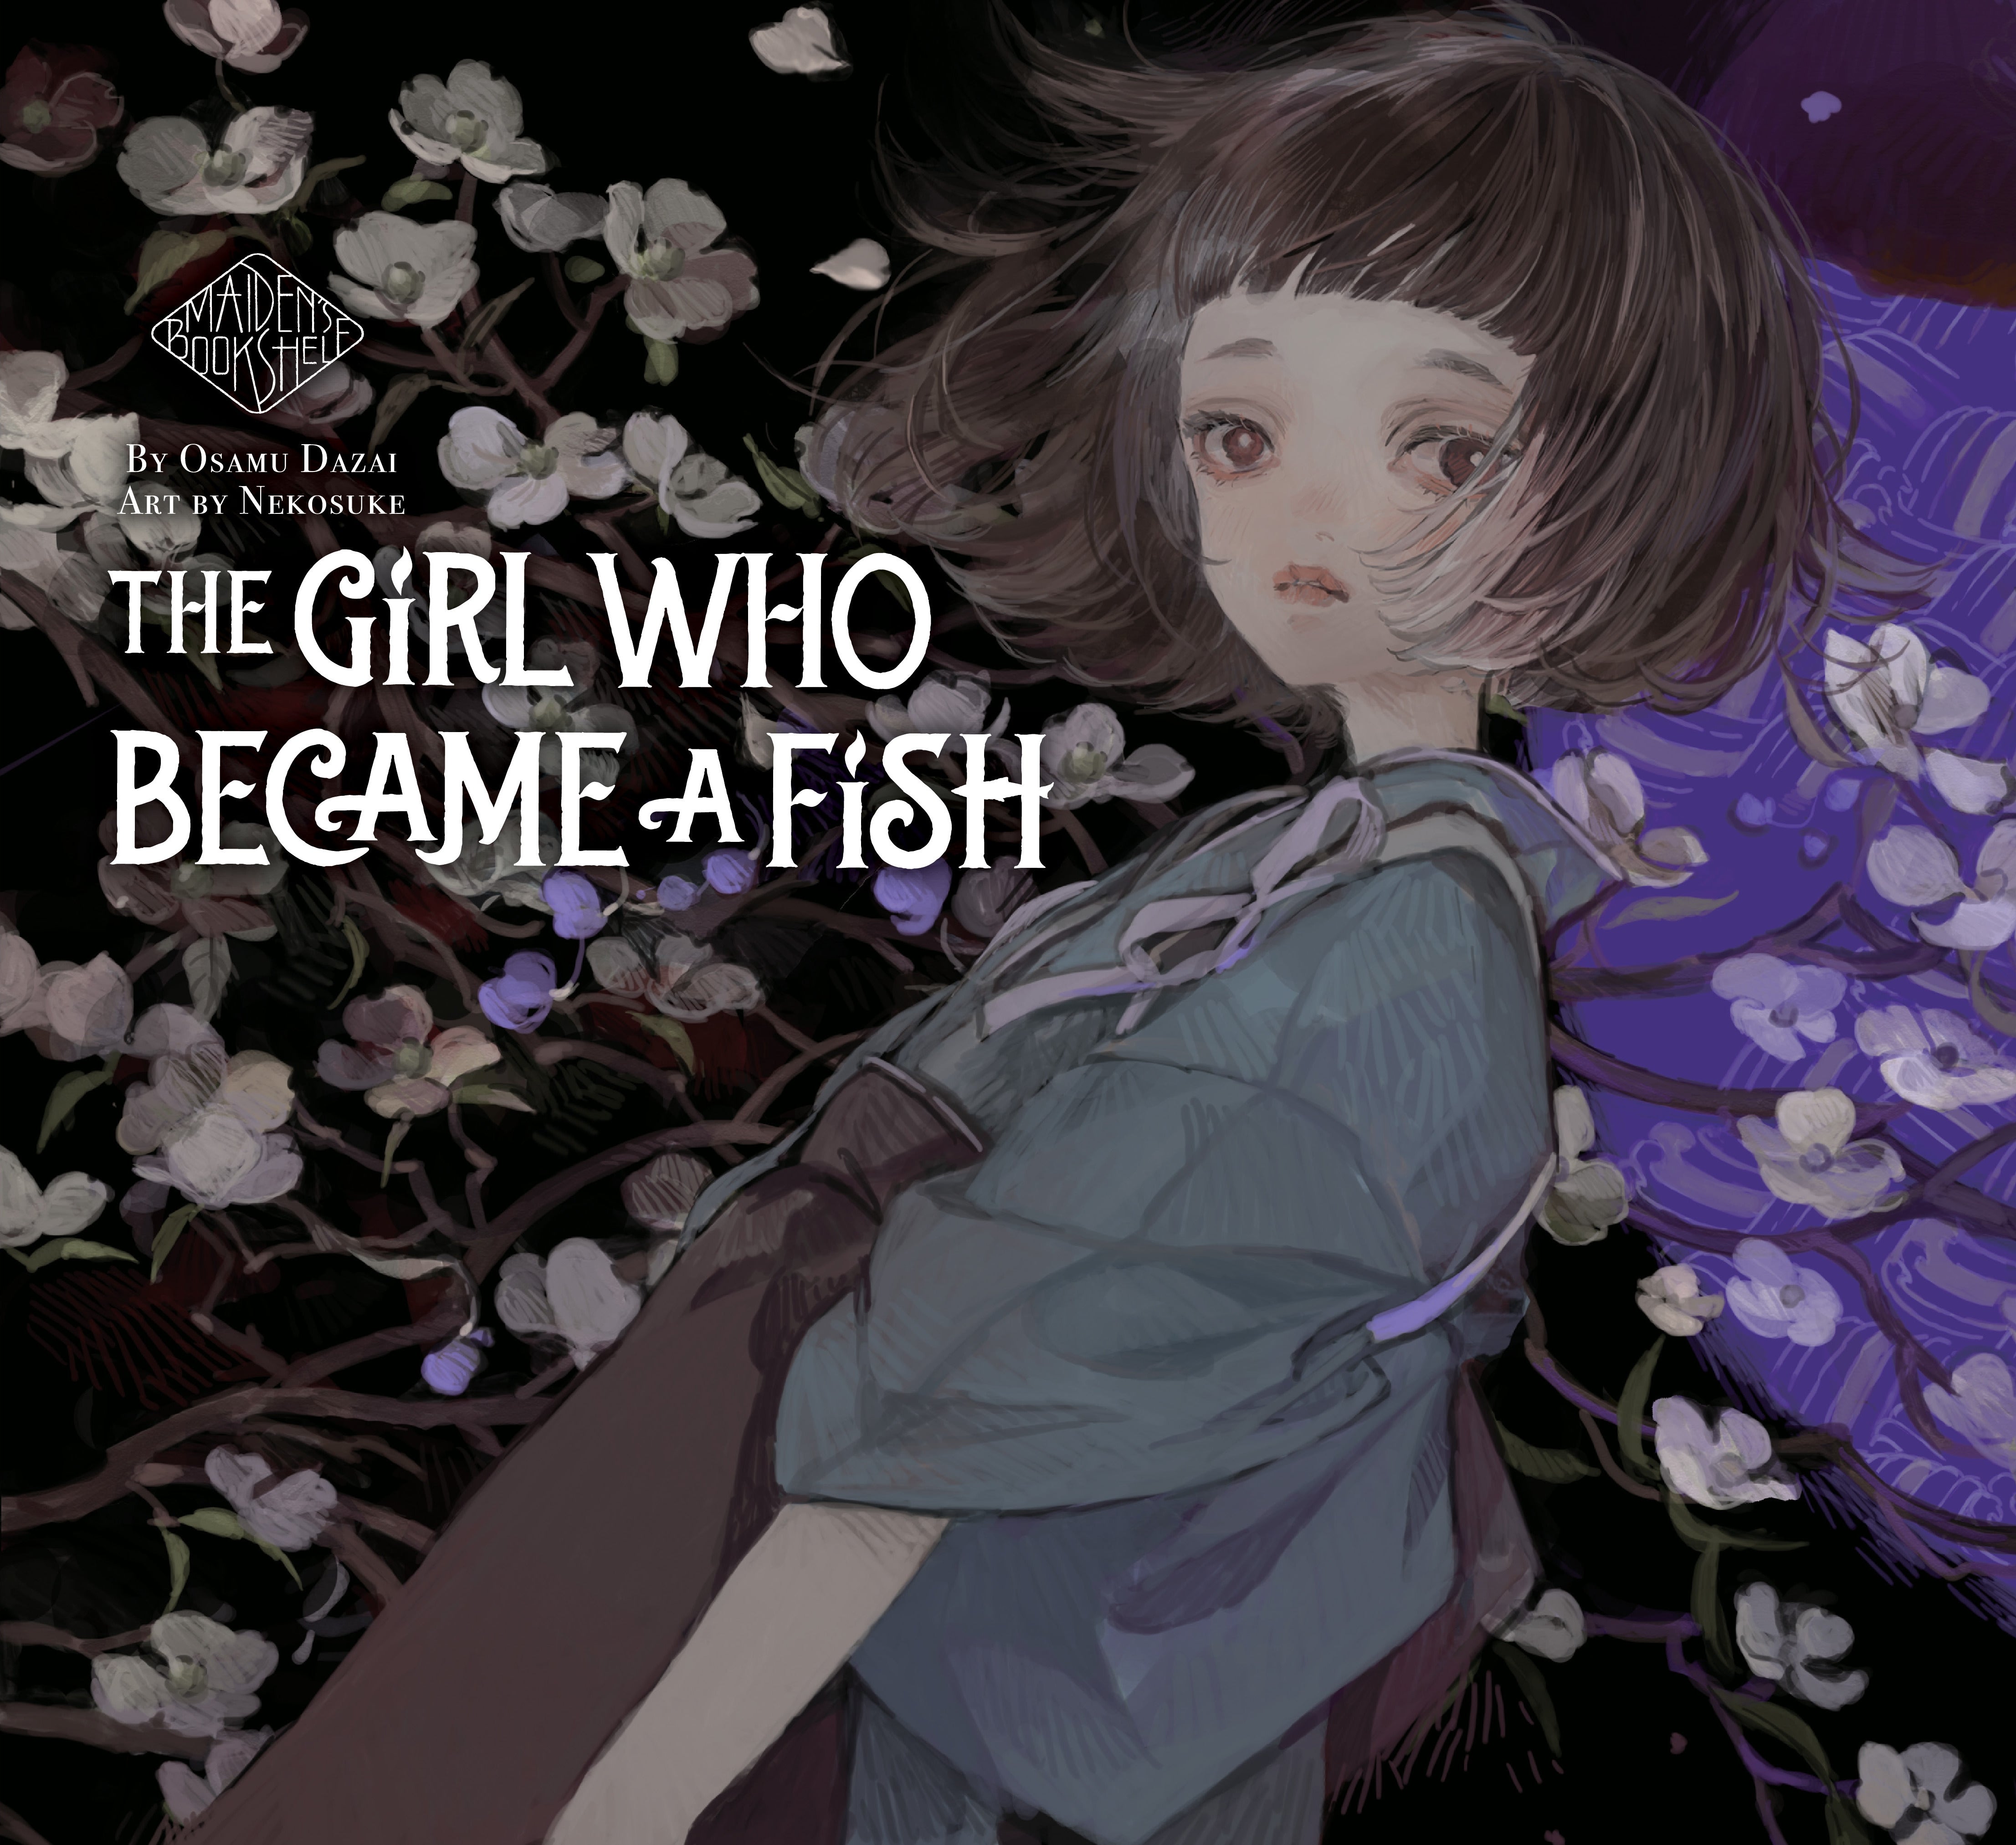 Maiden's Bookshelf: The Girl Who Became a Fish